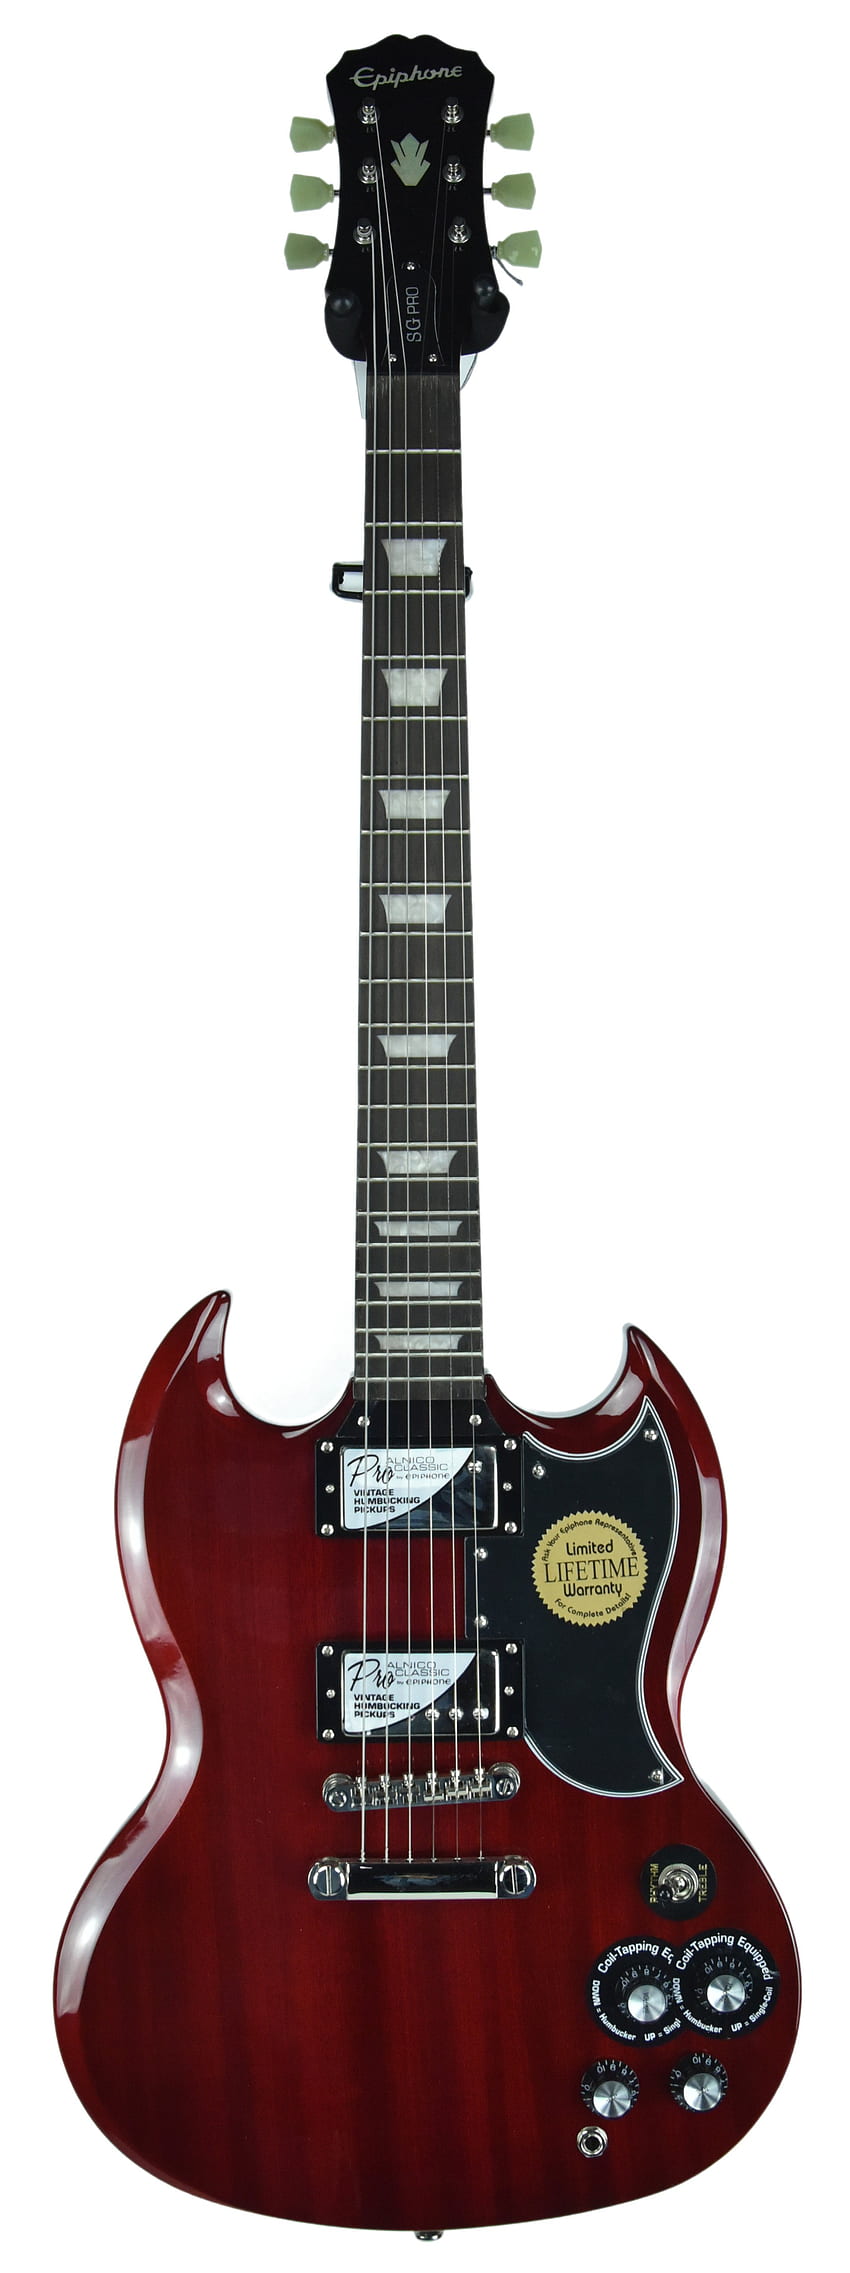 SOLD - Epiphone SG G400 Pro in Cherry 1406200230. The Music Gallery HD phone wallpaper